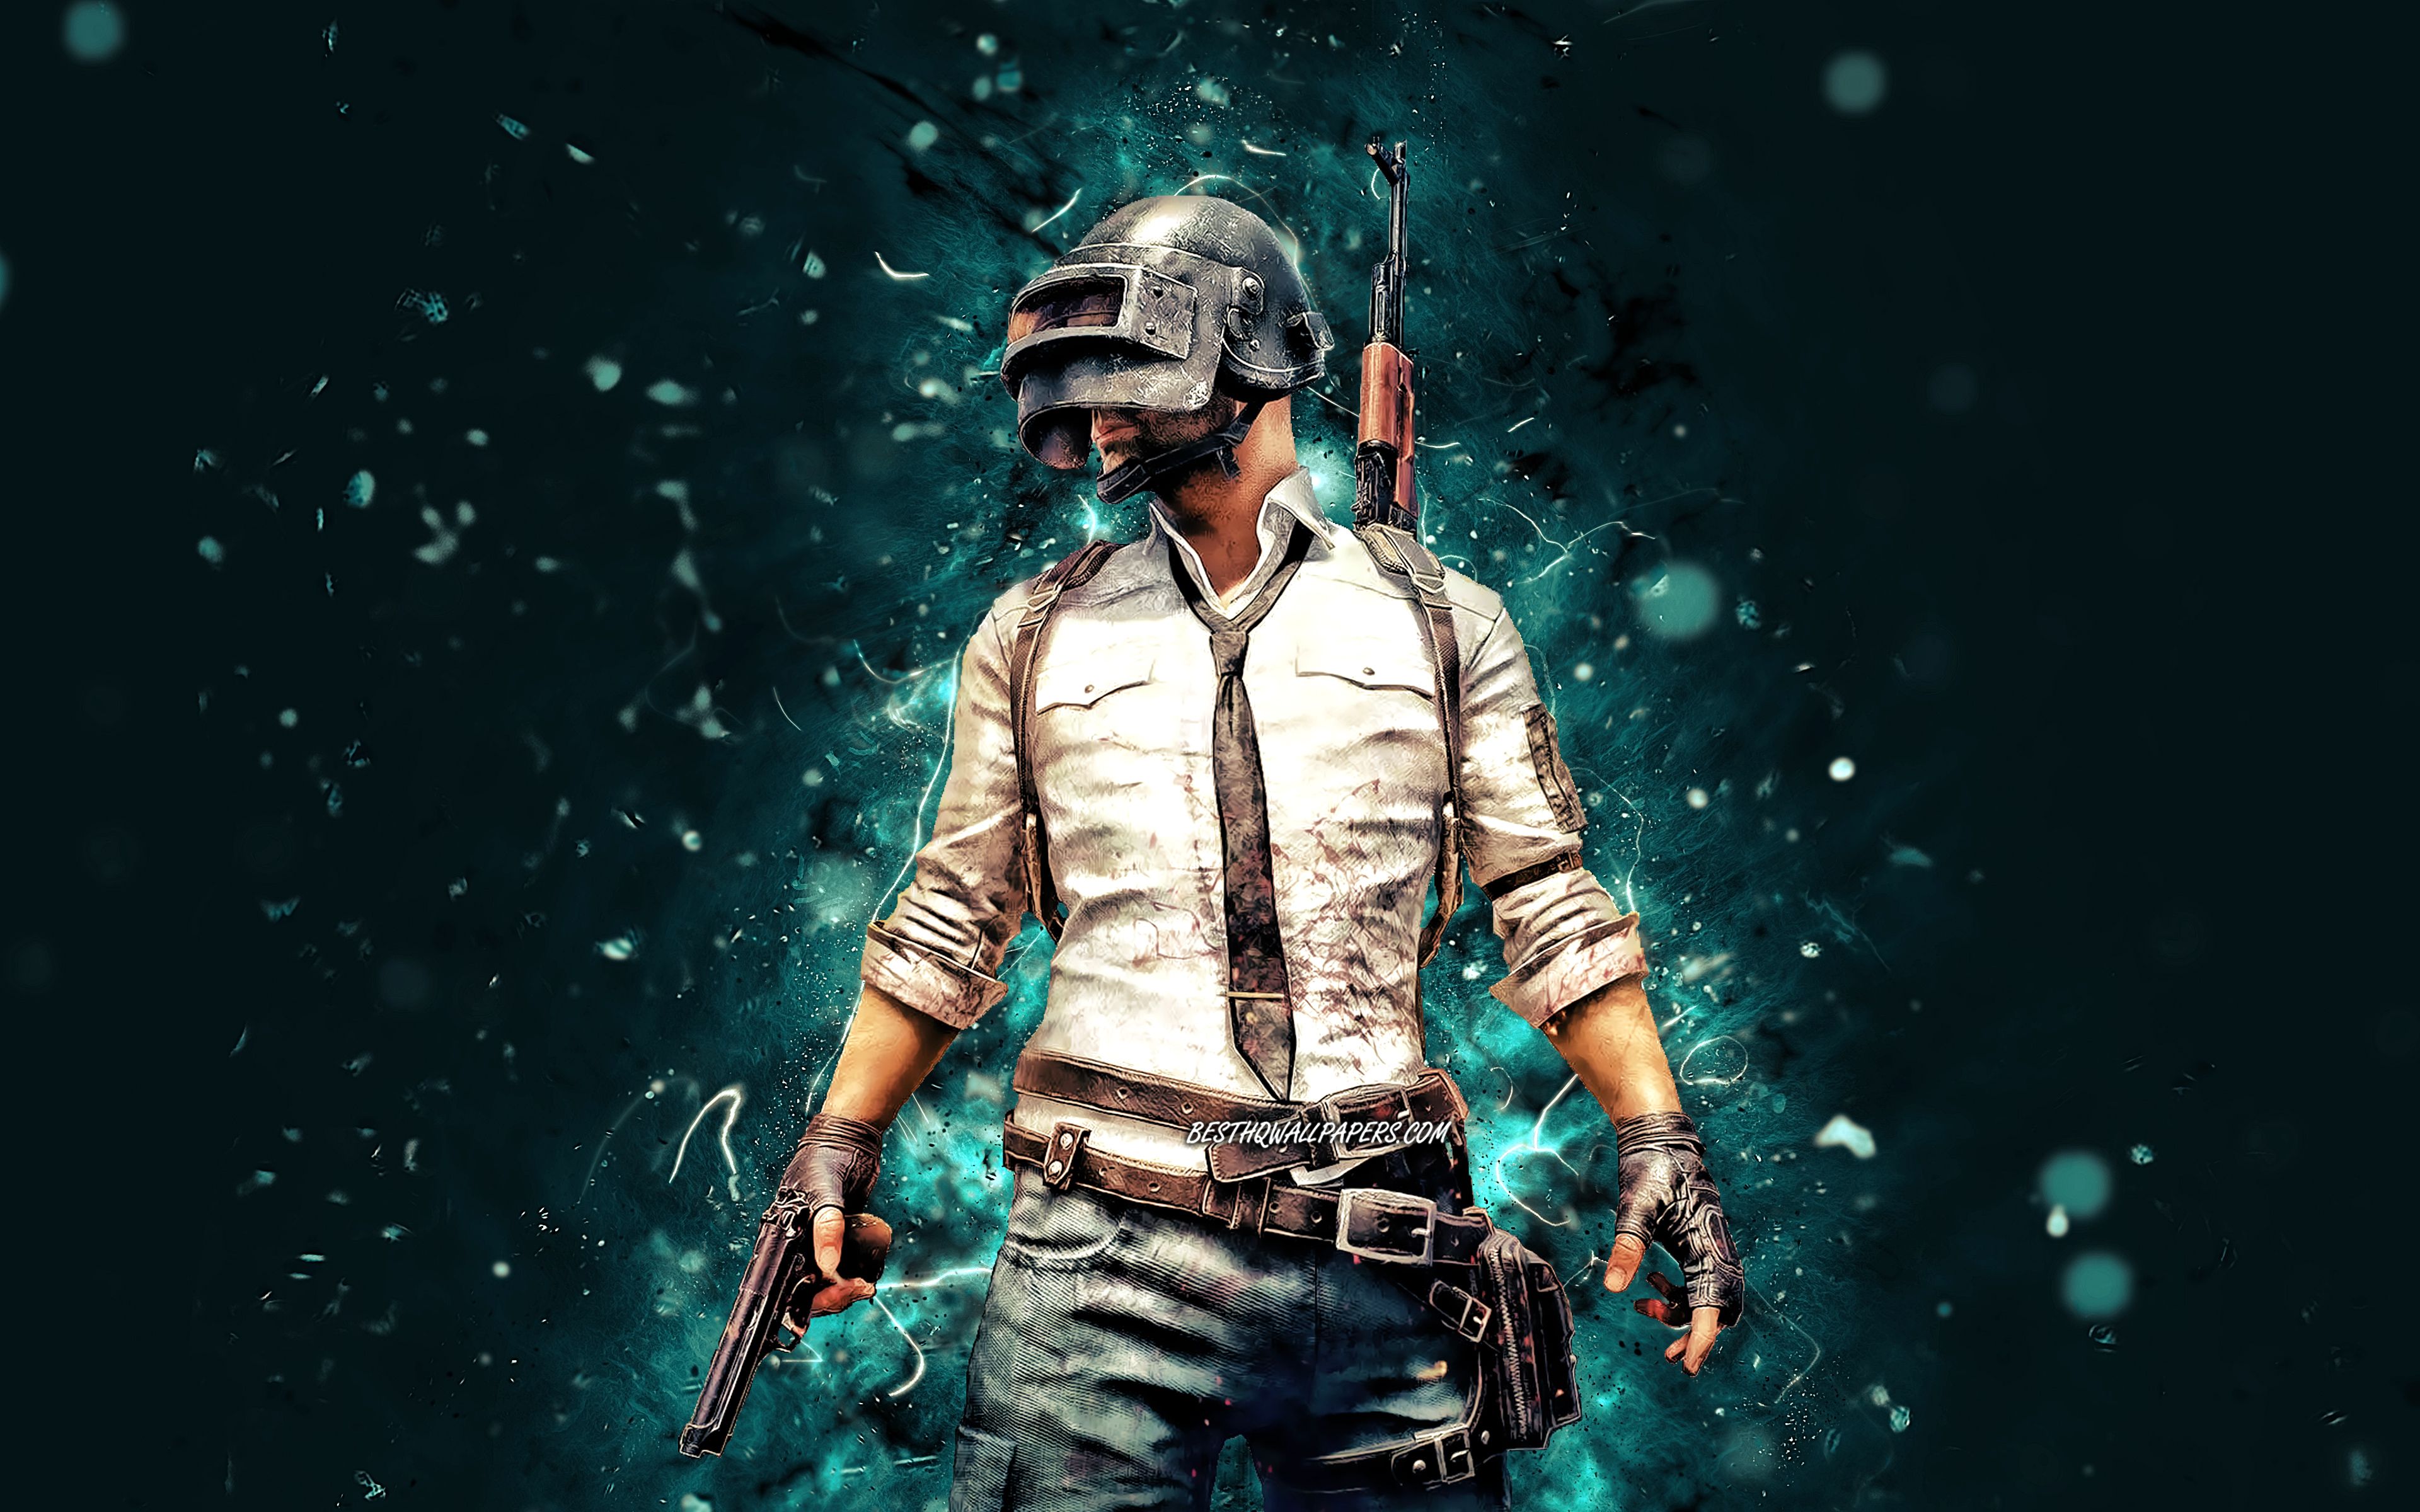 Download wallpaper PlayerUnknowns Battlegrounds 4k, blue neon lights, PUBG characters, main character, creative, PlayerUnknowns Battlegrounds character for desktop with resolution 3840x2400. High Quality HD picture wallpaper